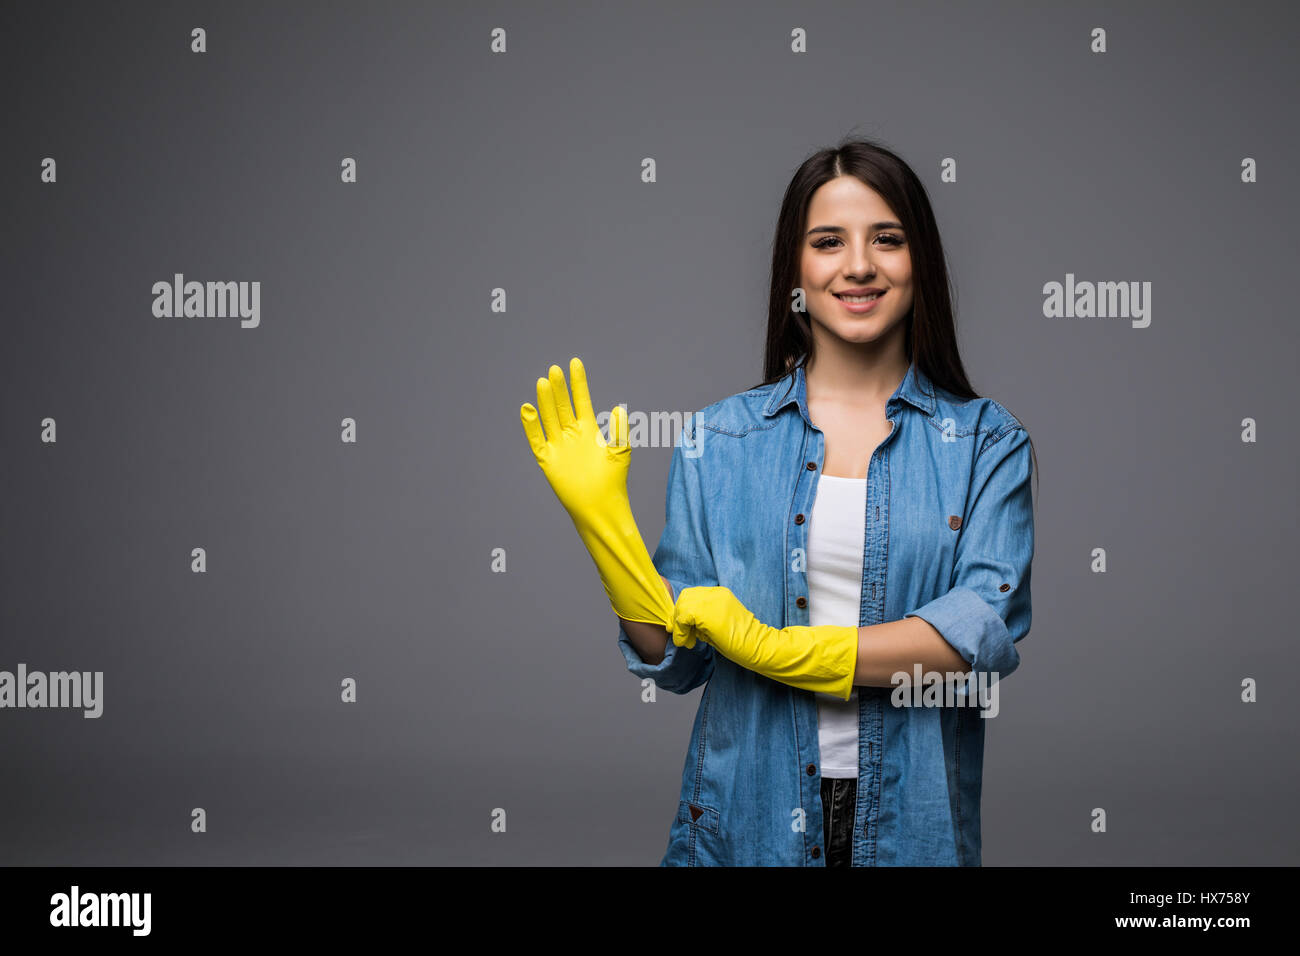 Cleaning lady getting spring cleaning ready putting on rubber gloves. Cleaning woman smiling happy at camera Stock Photo